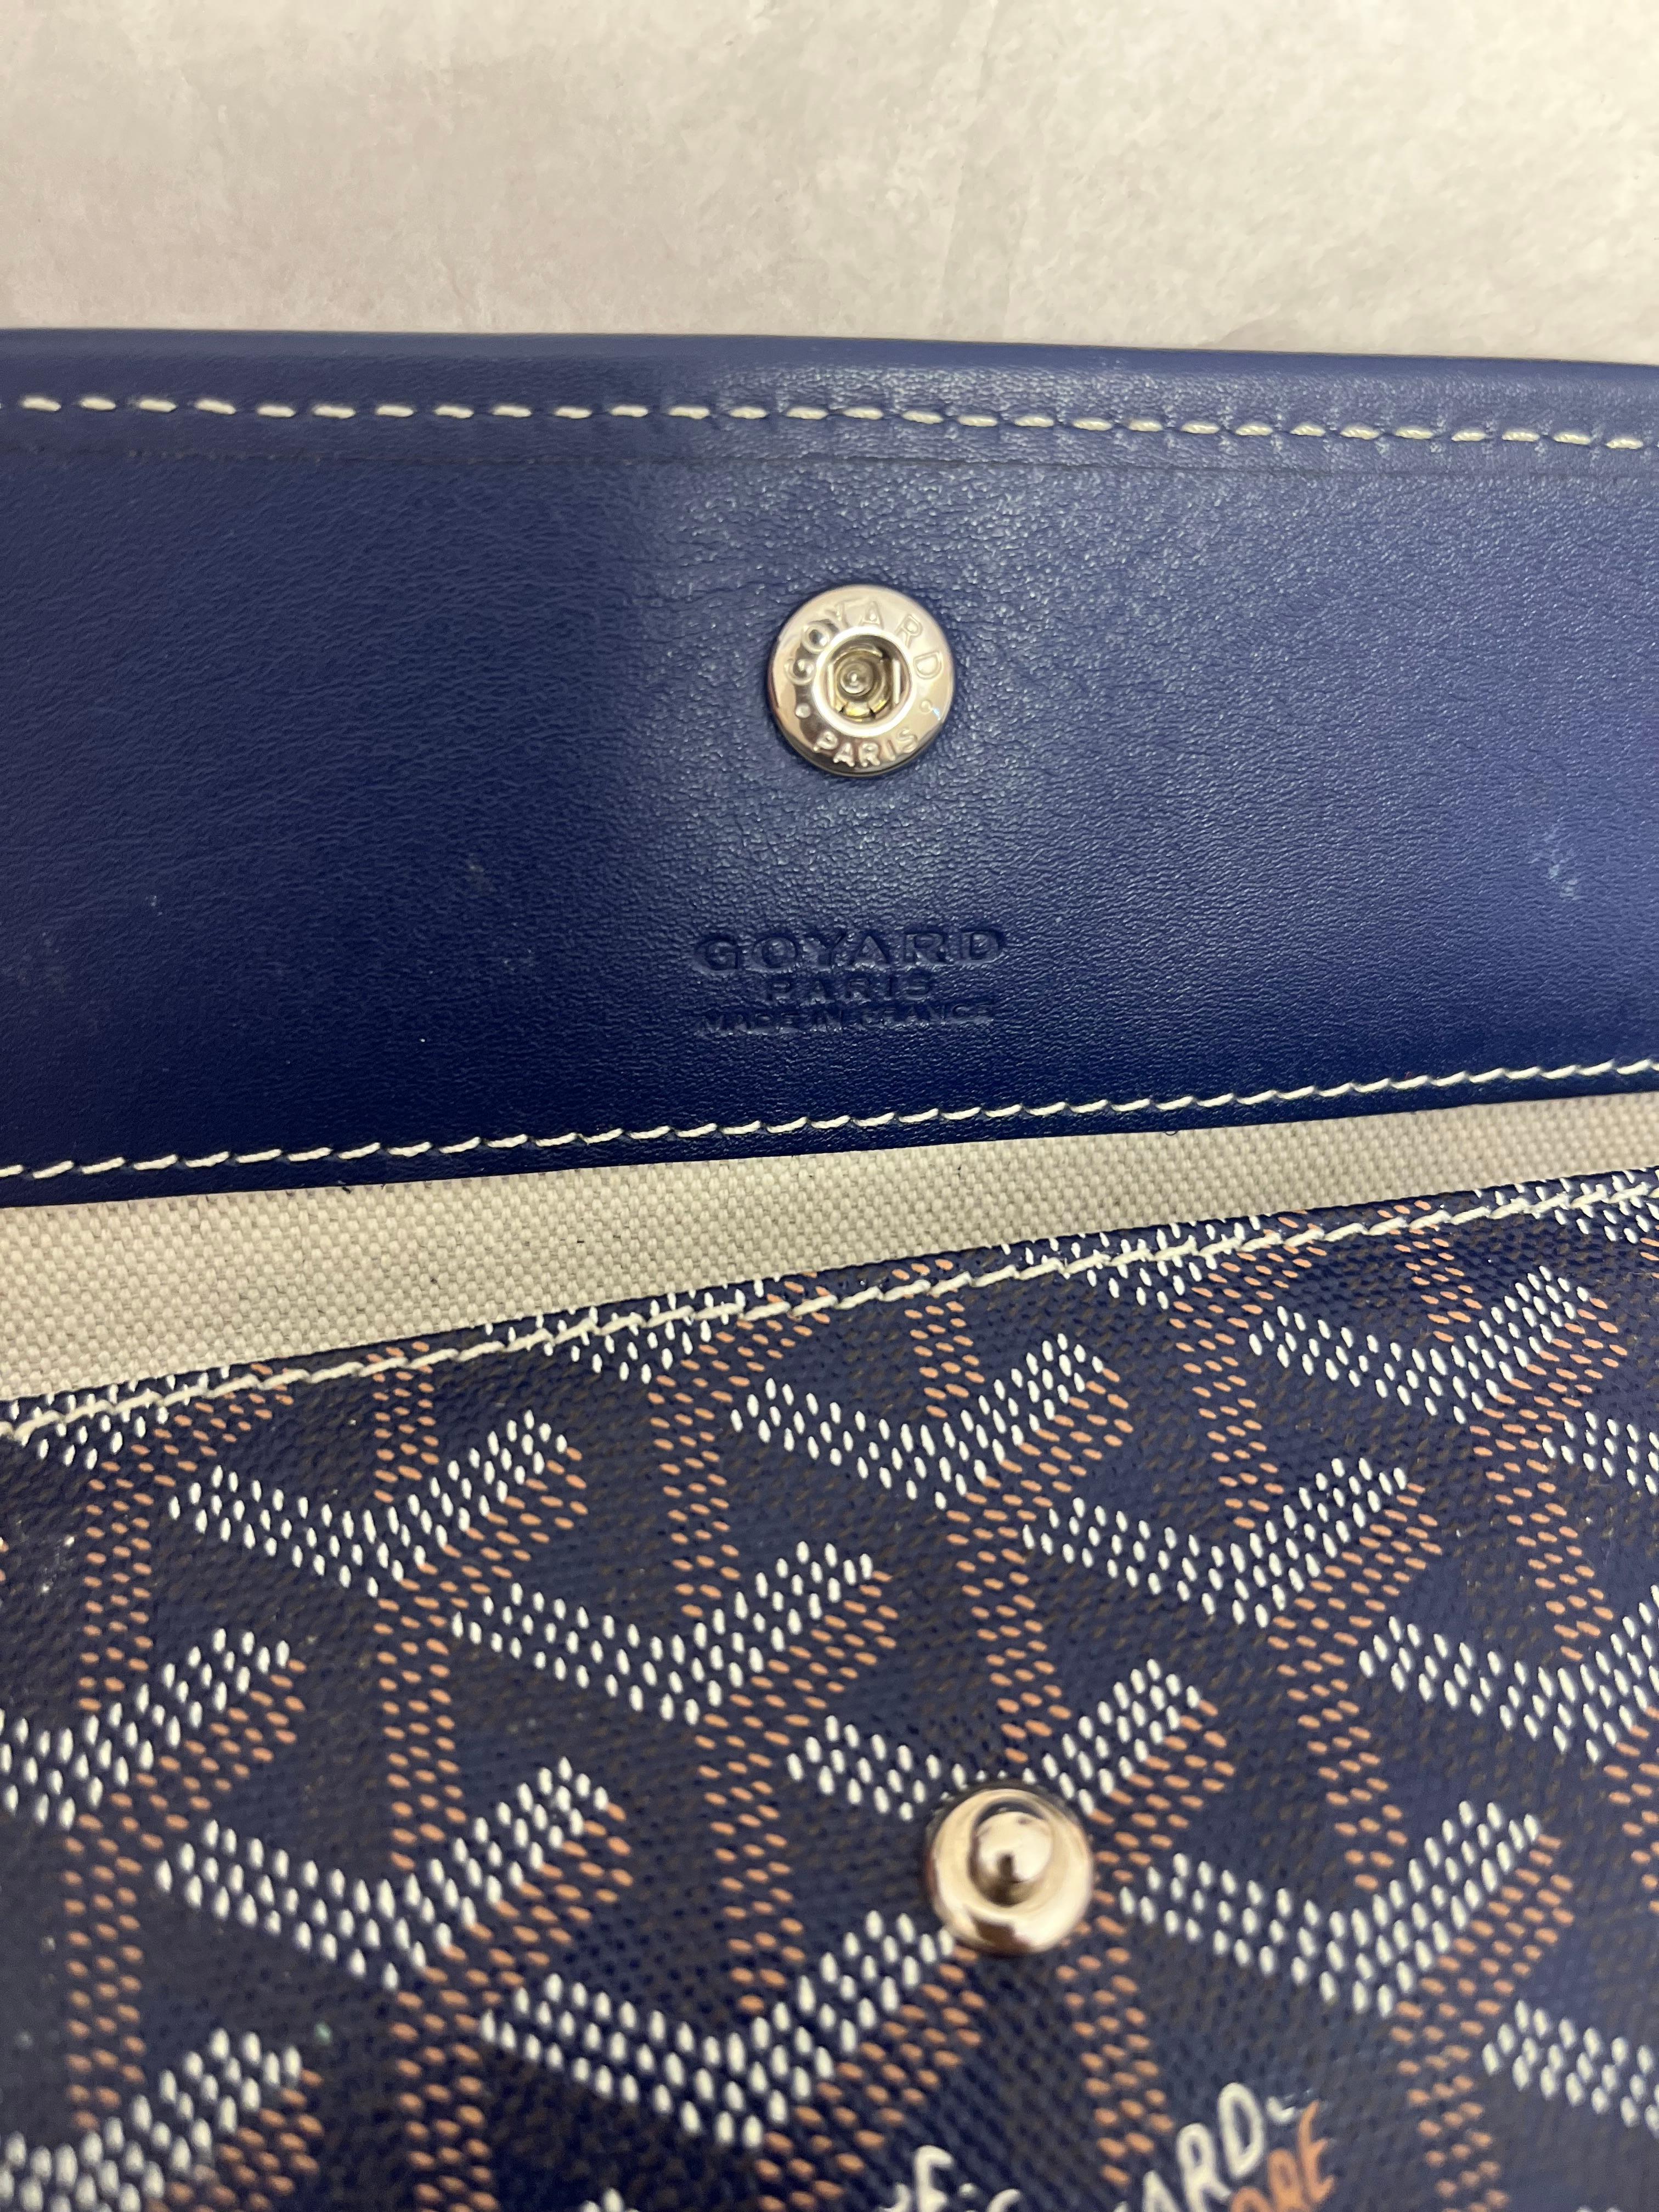 Goyard Saint Louis PM Tote in Blue In Good Condition For Sale In Port Hope, ON